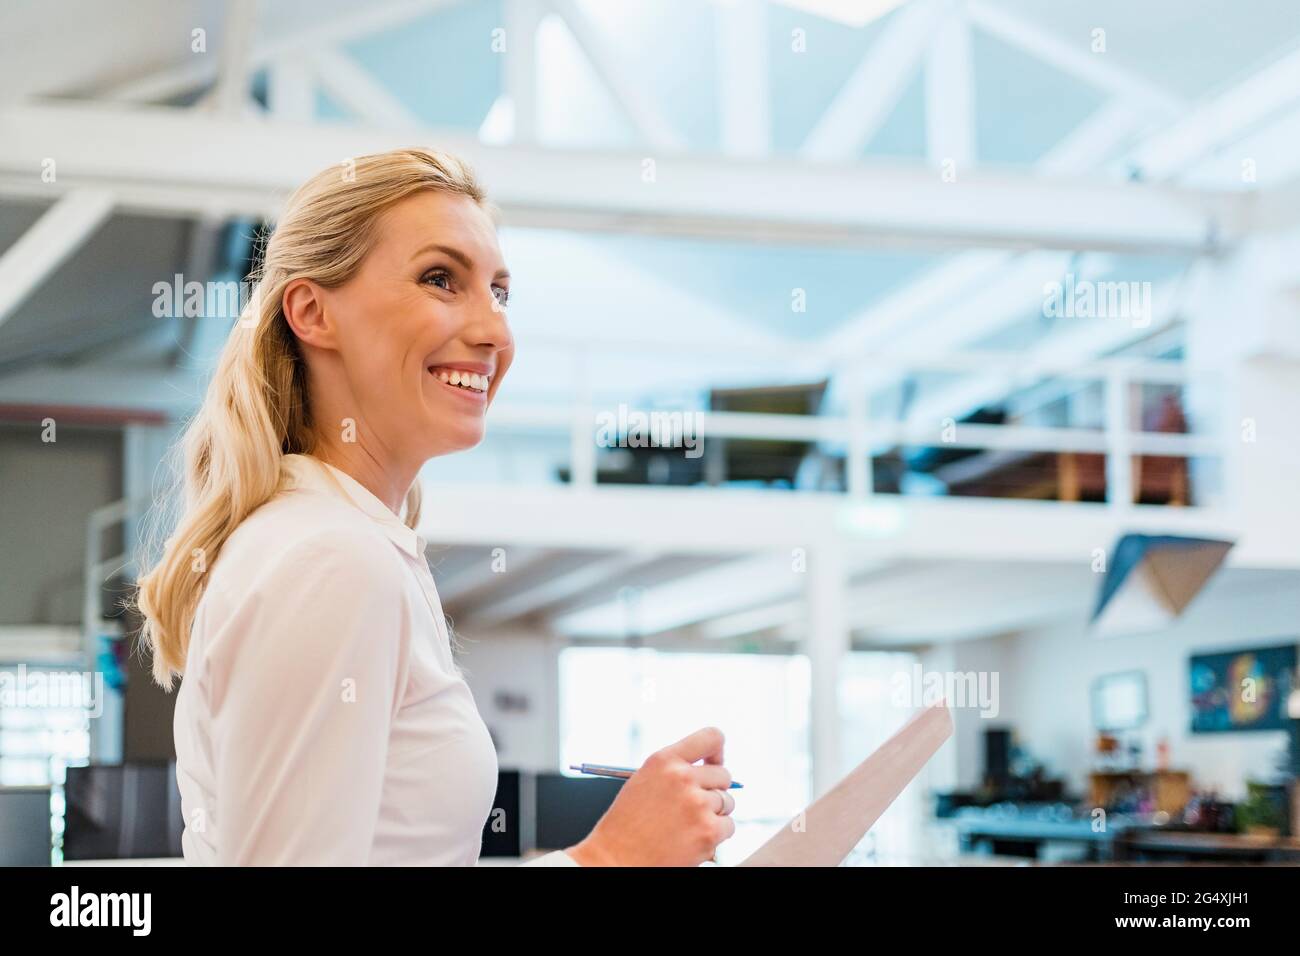 Smiling blond female professional with documents in creative office looking away Stock Photo